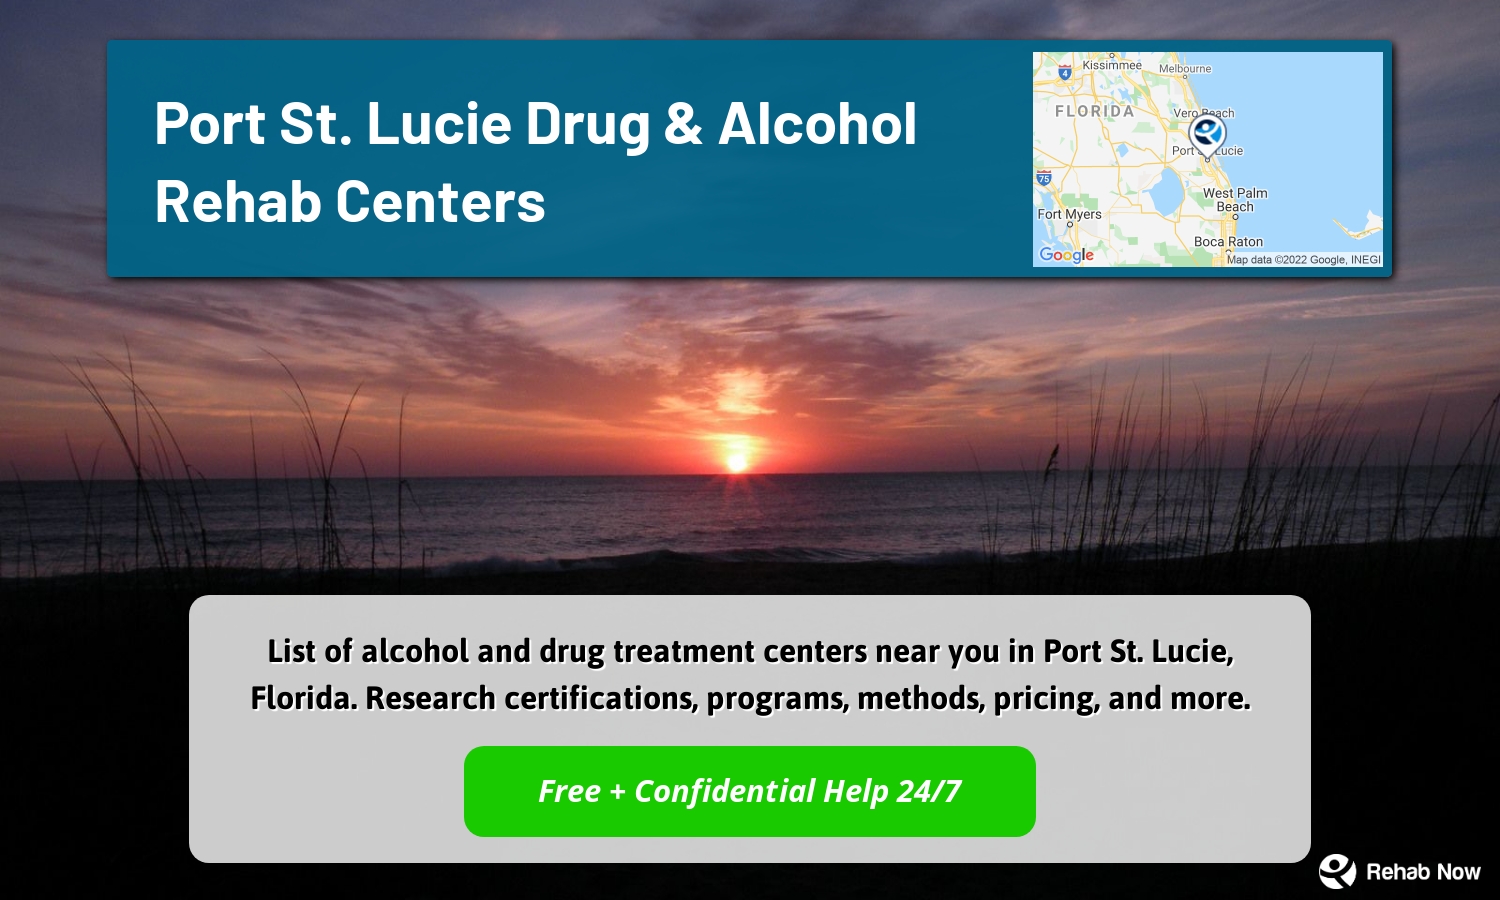 List of alcohol and drug treatment centers near you in Port St. Lucie, Florida. Research certifications, programs, methods, pricing, and more.